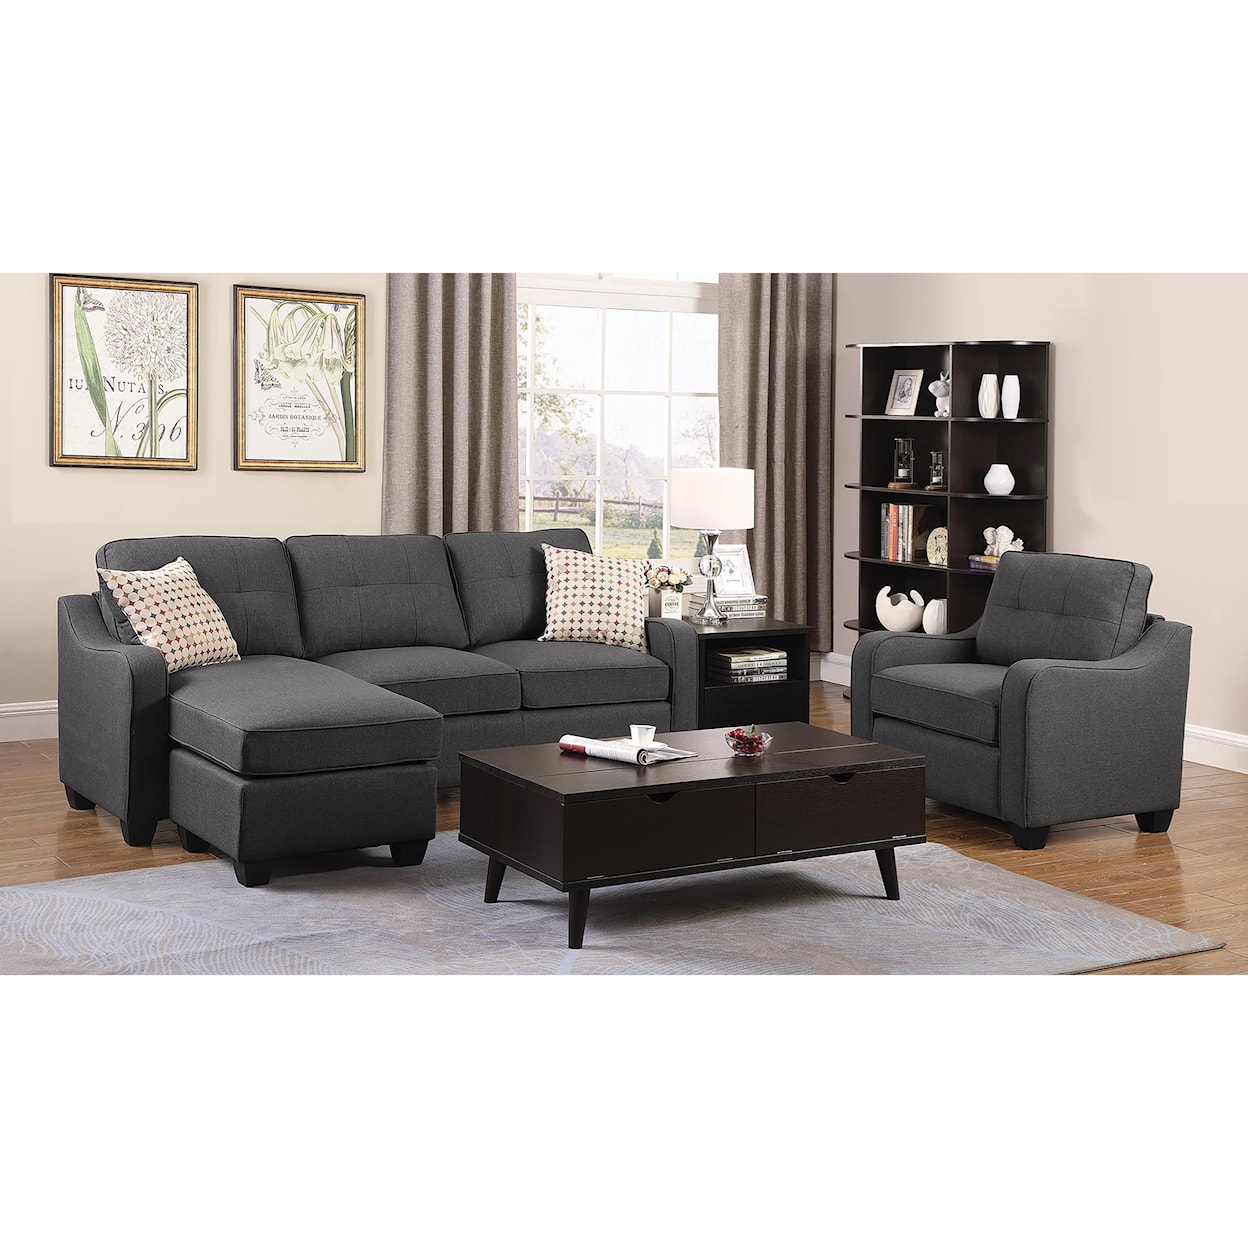 Coaster 508320 Living Room Group